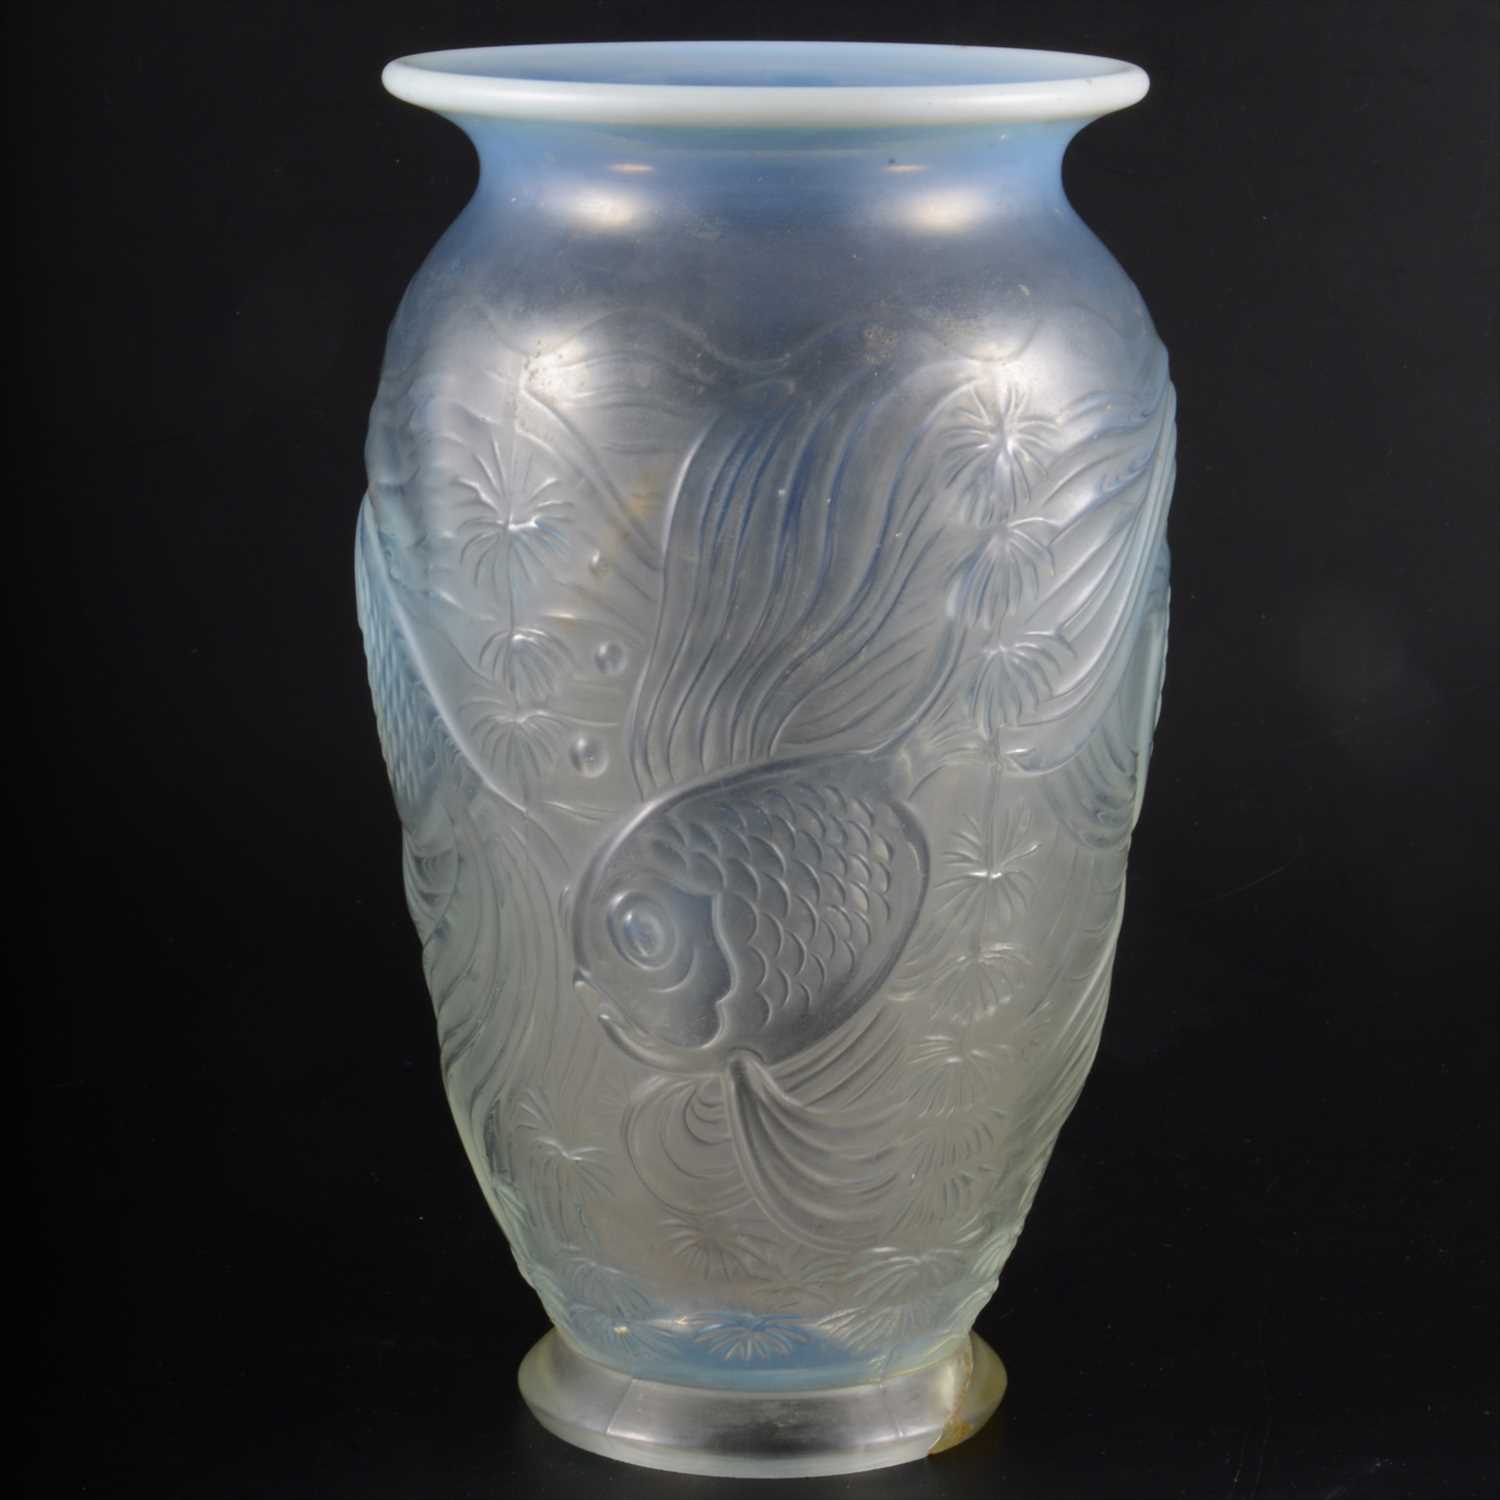 Lot 112 - An Art Deco opalescent glass vase with fish design.